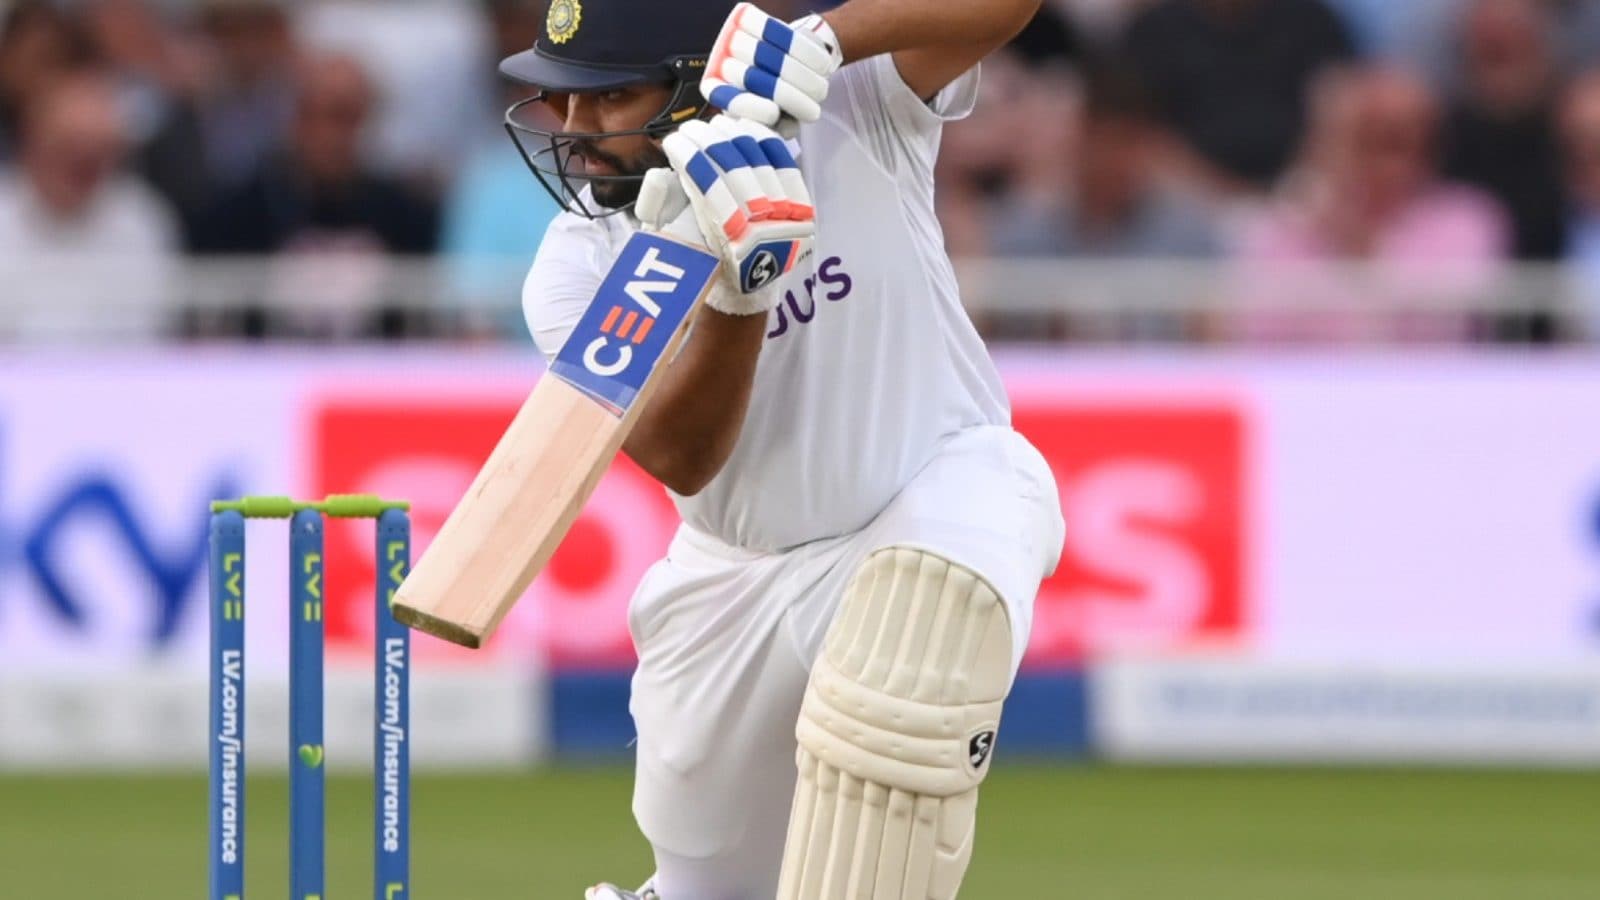 India vs England Highlights, 11st Test Match at Nottingham, Day 11